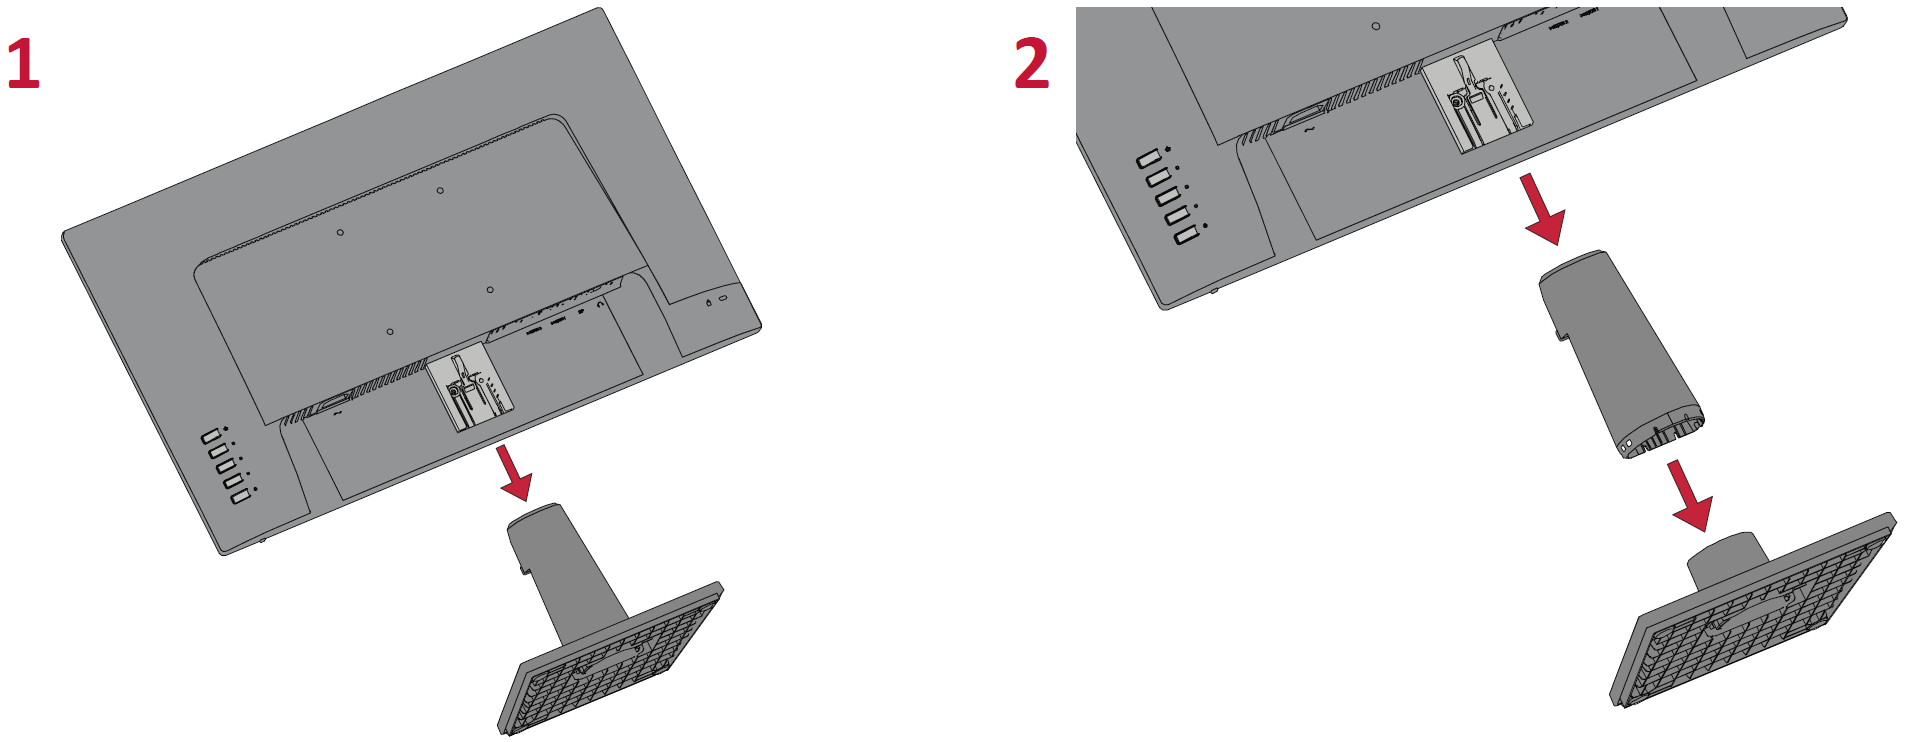 File:VX2405-P-mhd Wall Mounting.png